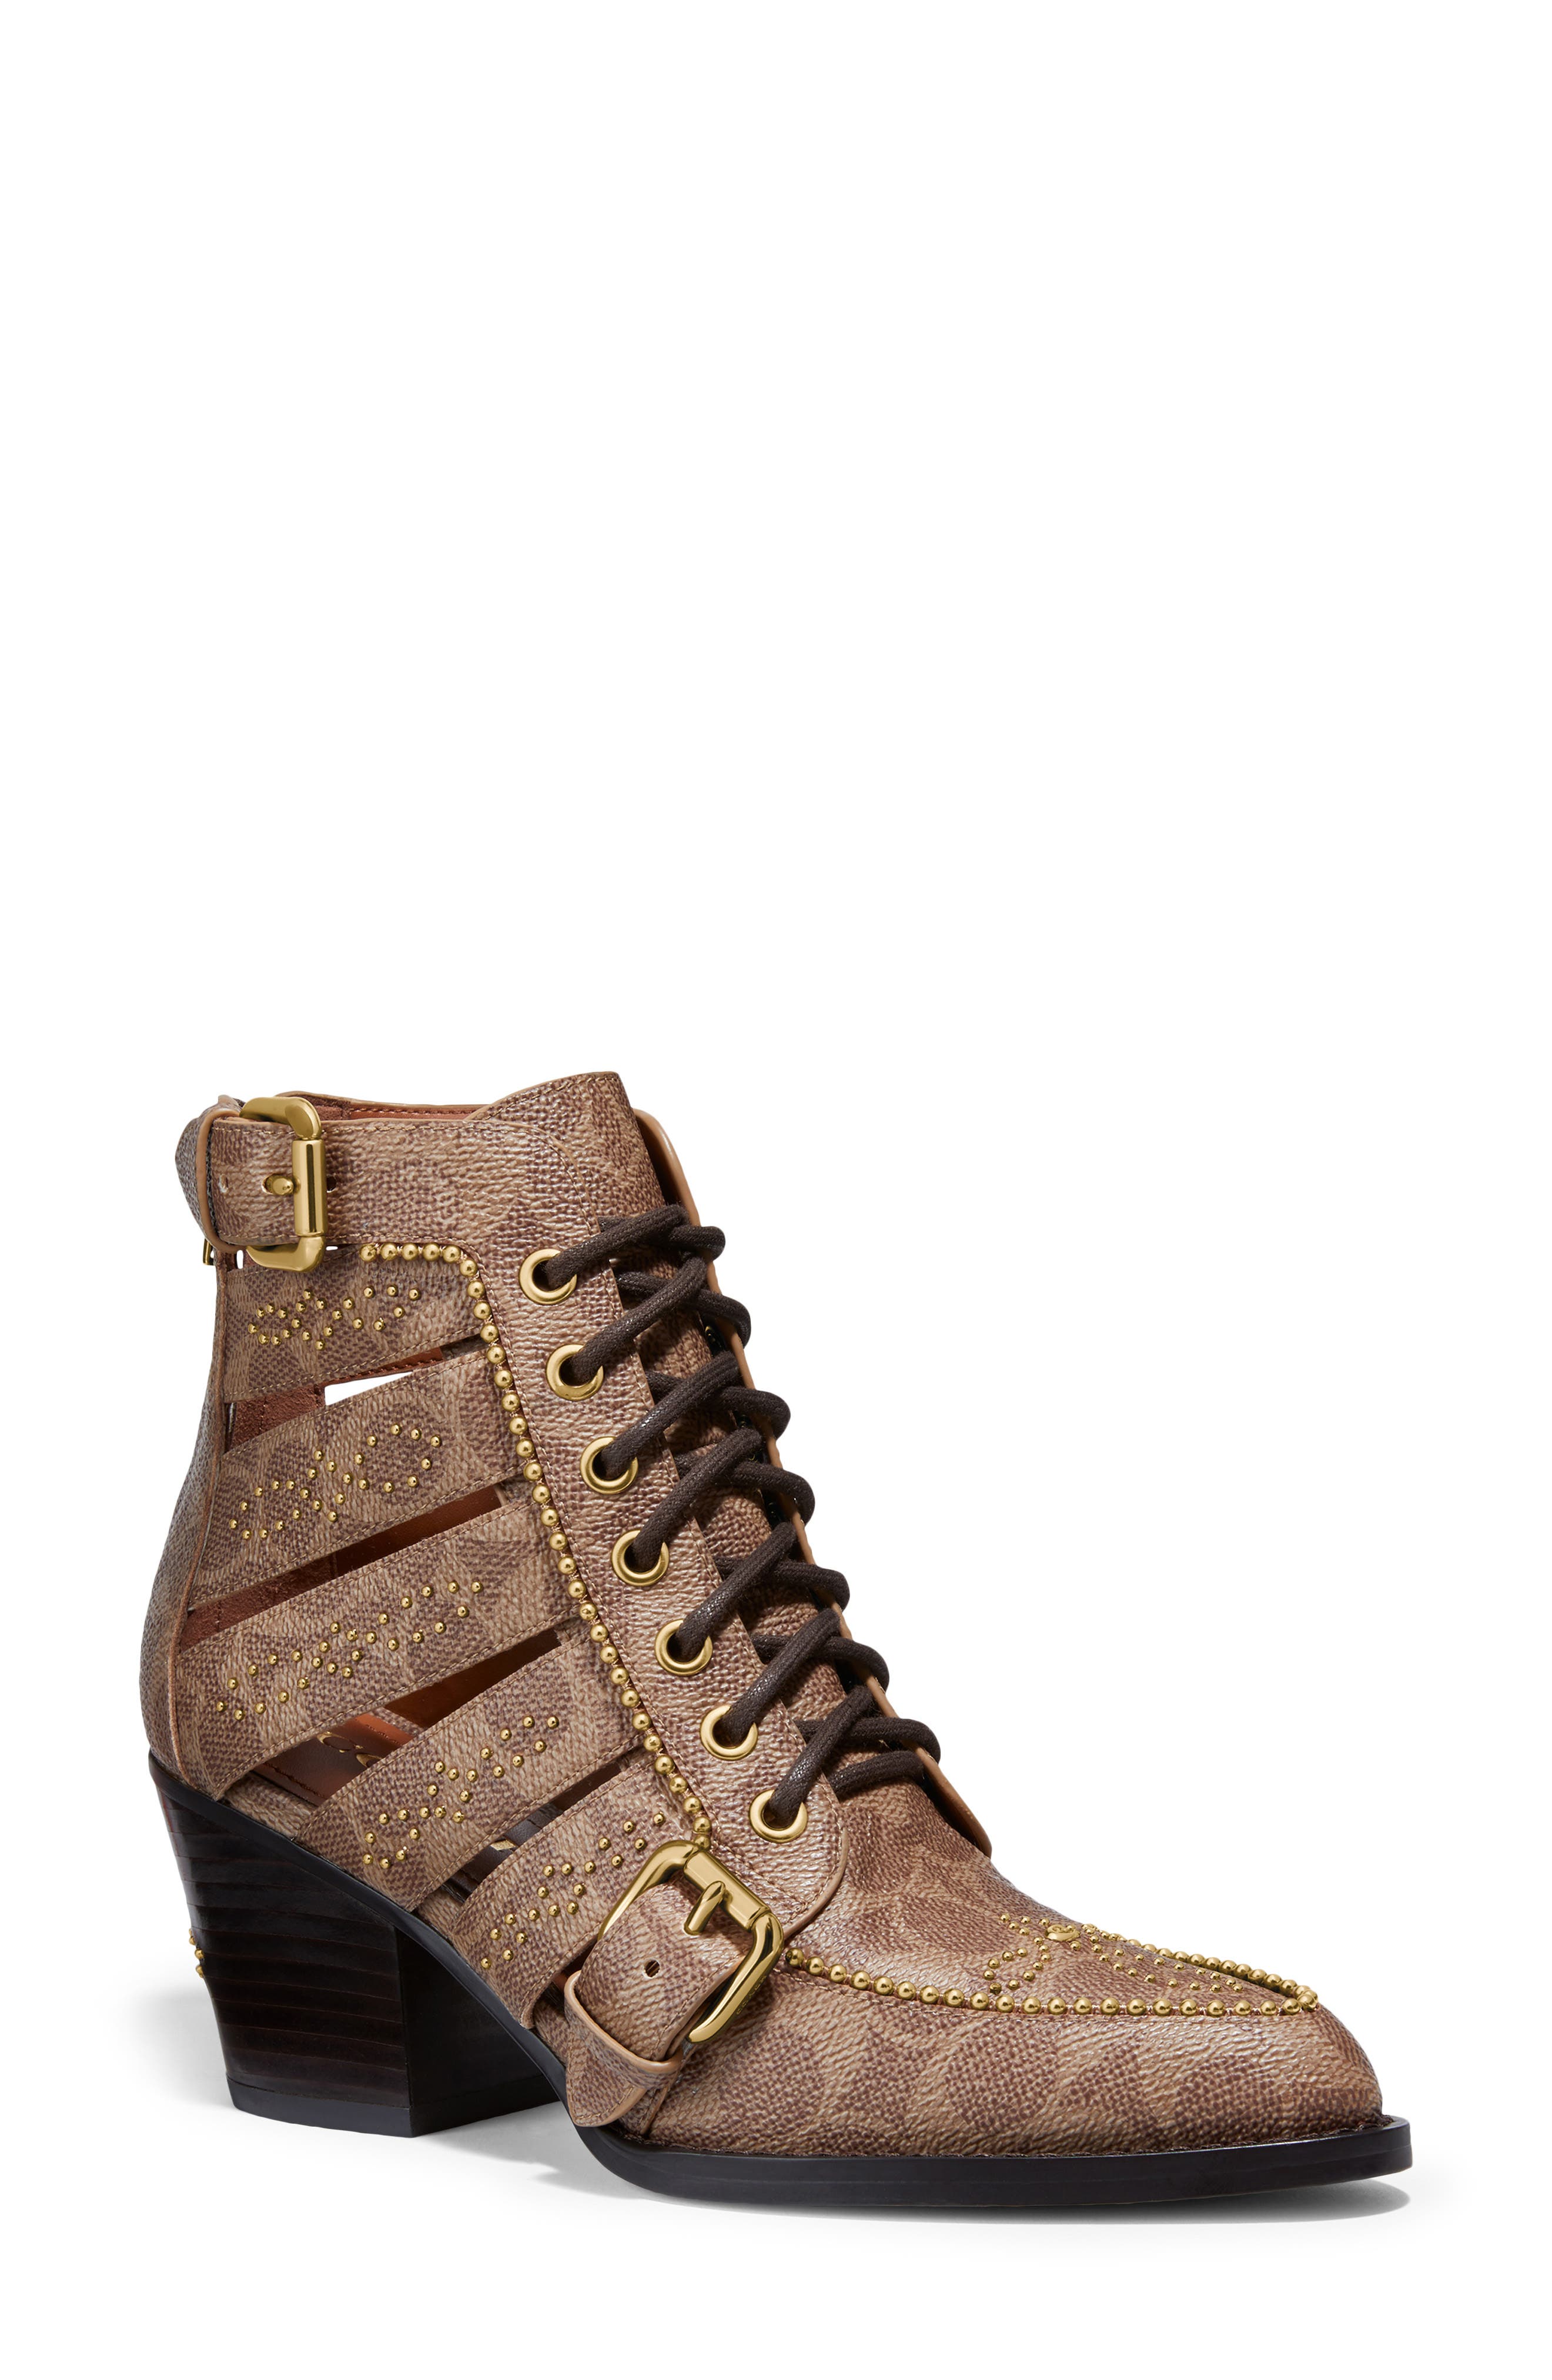 coach boots nordstrom